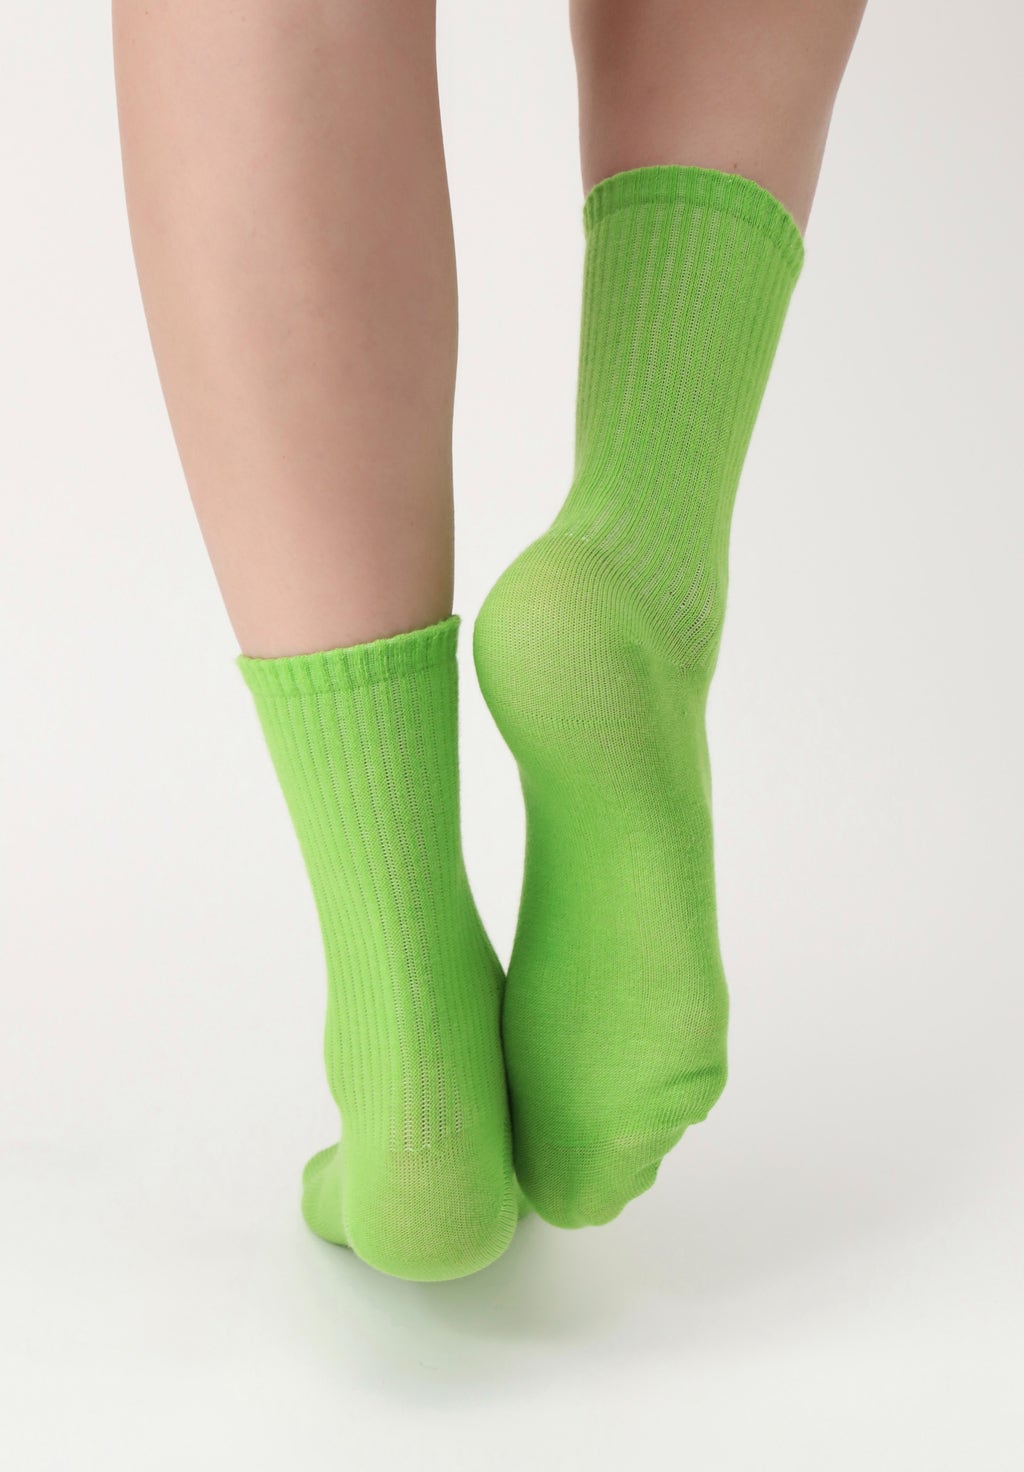 OroblÌ_ Color Block Twin Socks - Ribbed cotton mix bootie ankle high socks twin pack with shaped heel. One pair is white with lime green, blue and purple lines on the back and the other is a plain bright bold lime green colour.